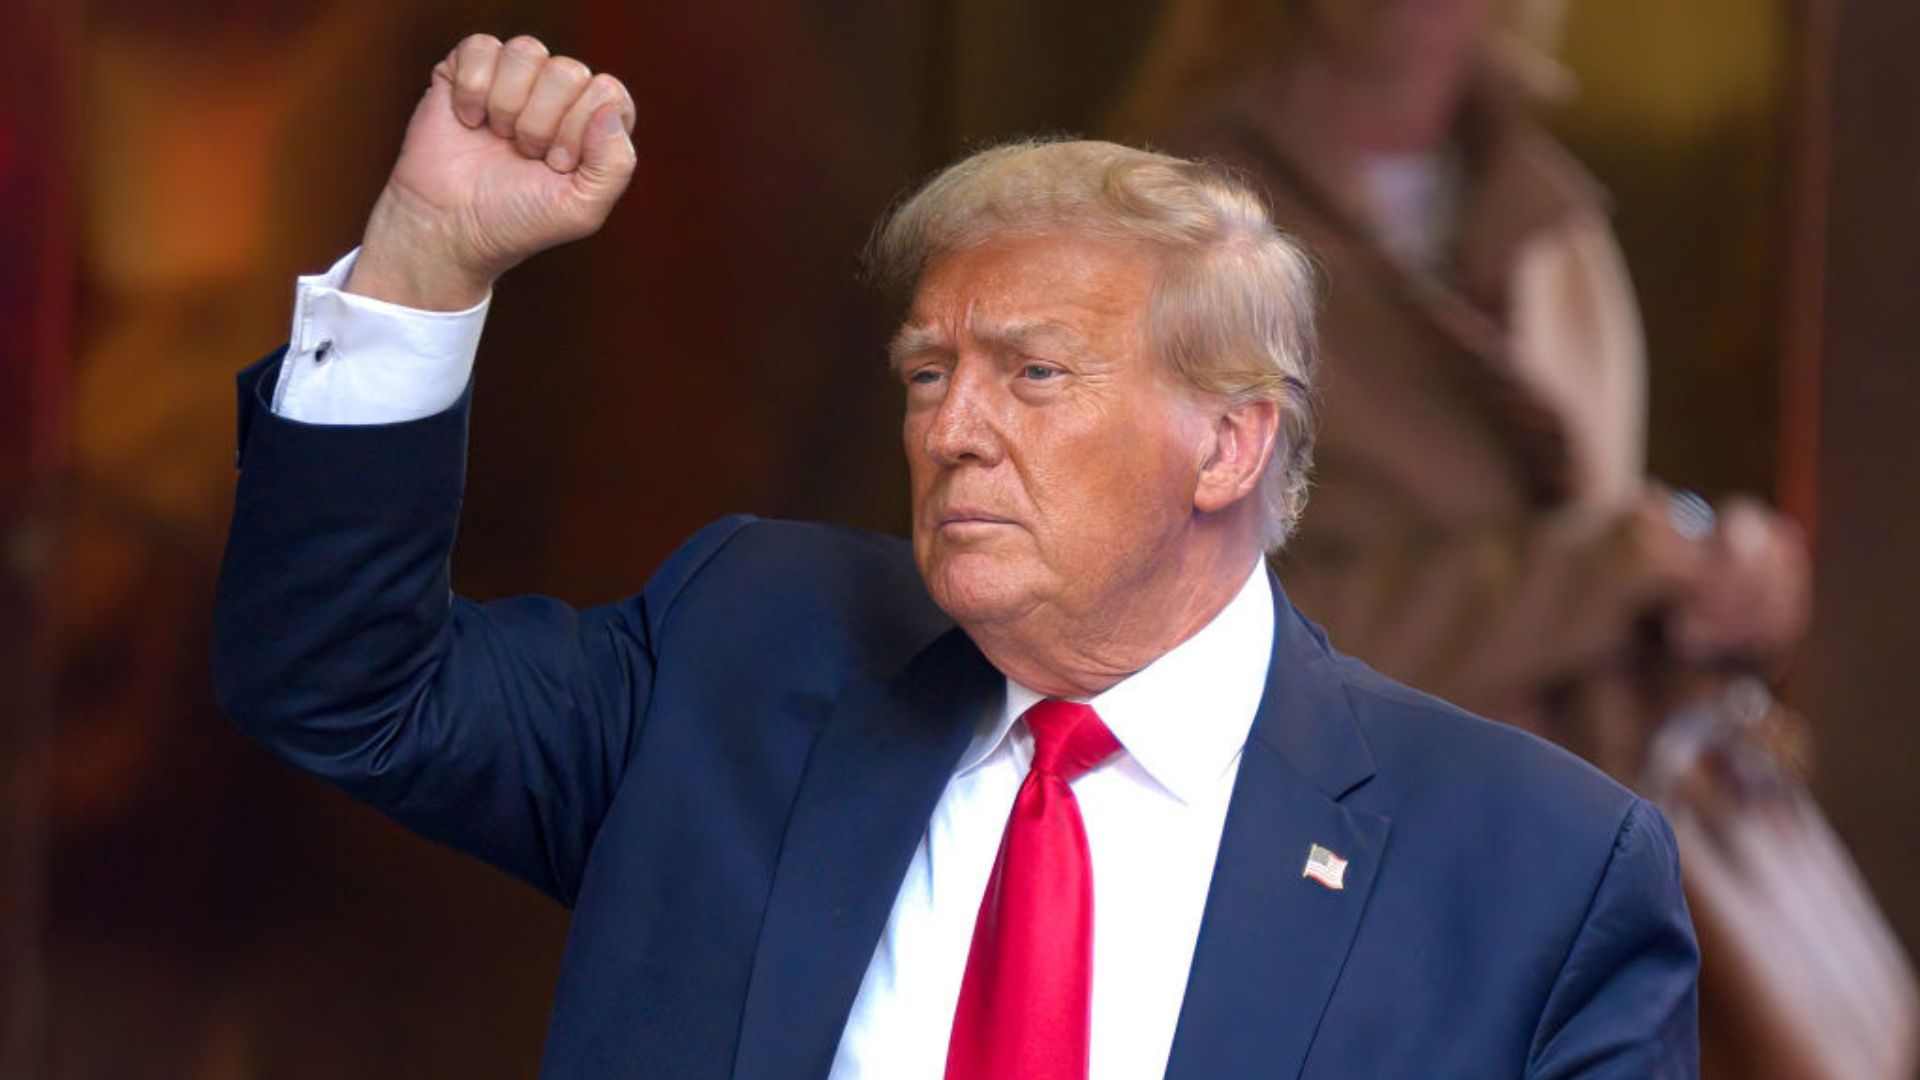 Donald Trump in a suit and red tie holding up his fist